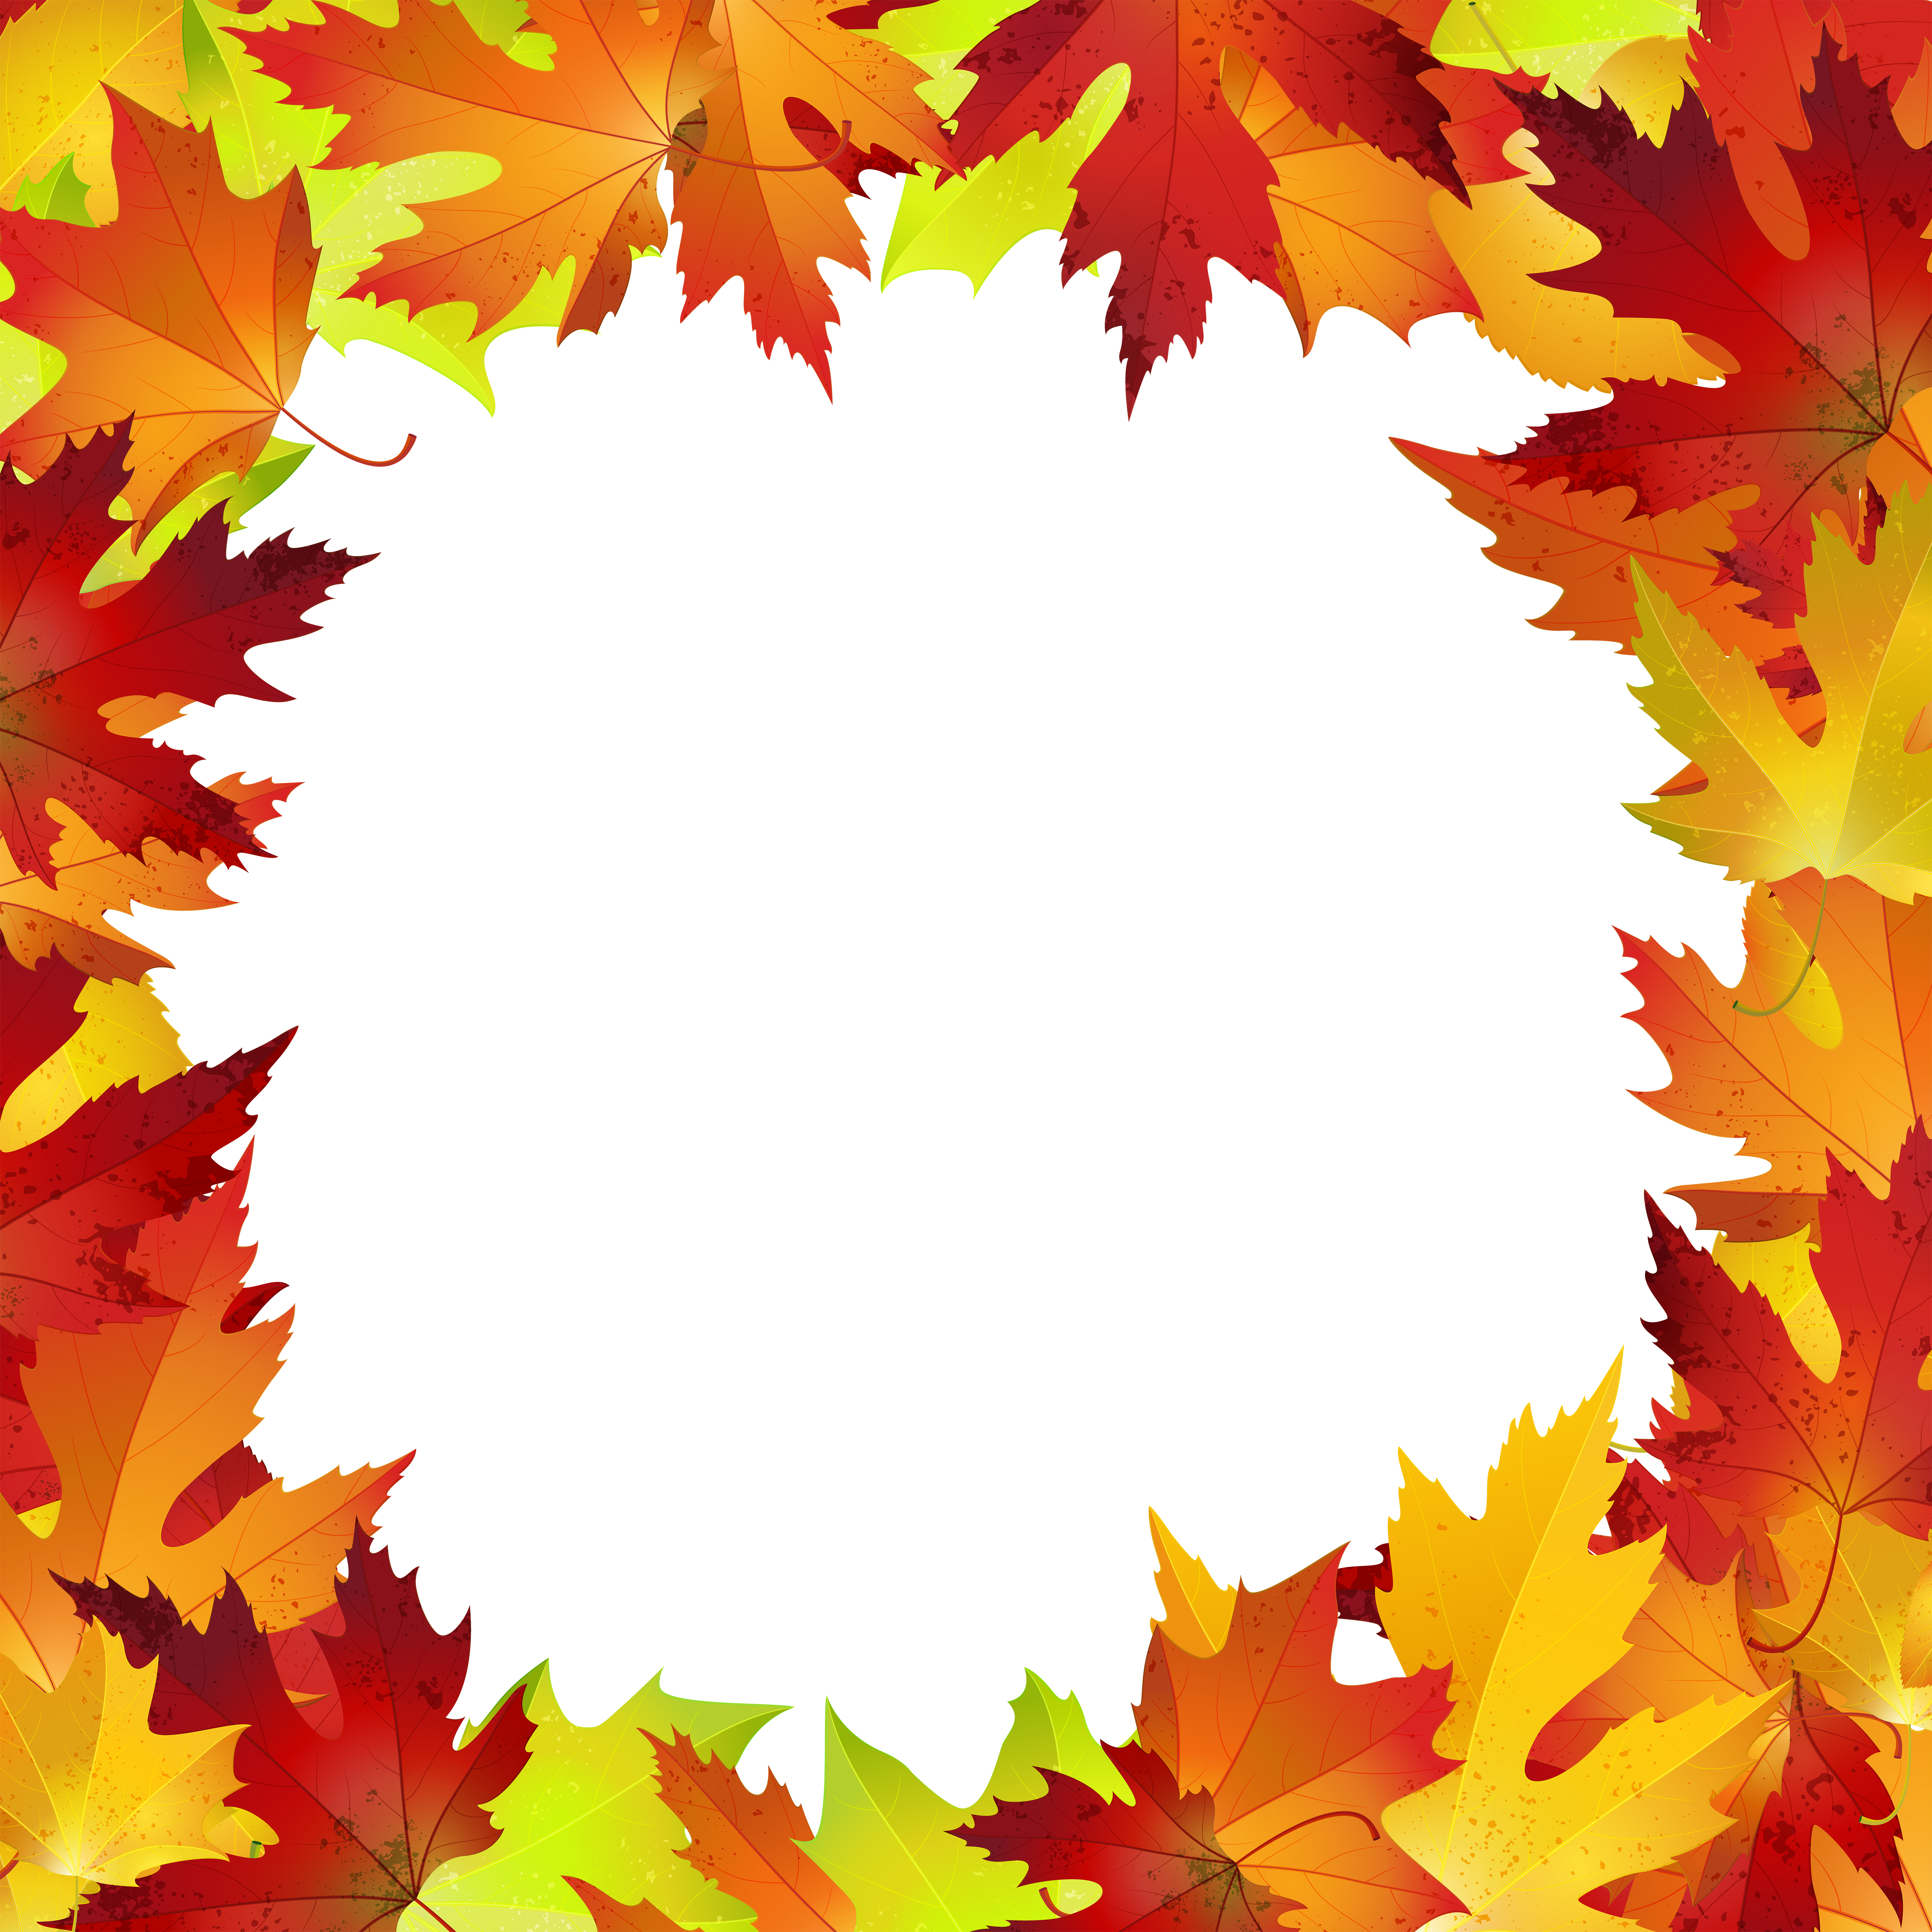 Autumn Leaves Border PNG Clip Art Image​-Quality Image and Transparent PNG Free Clipart